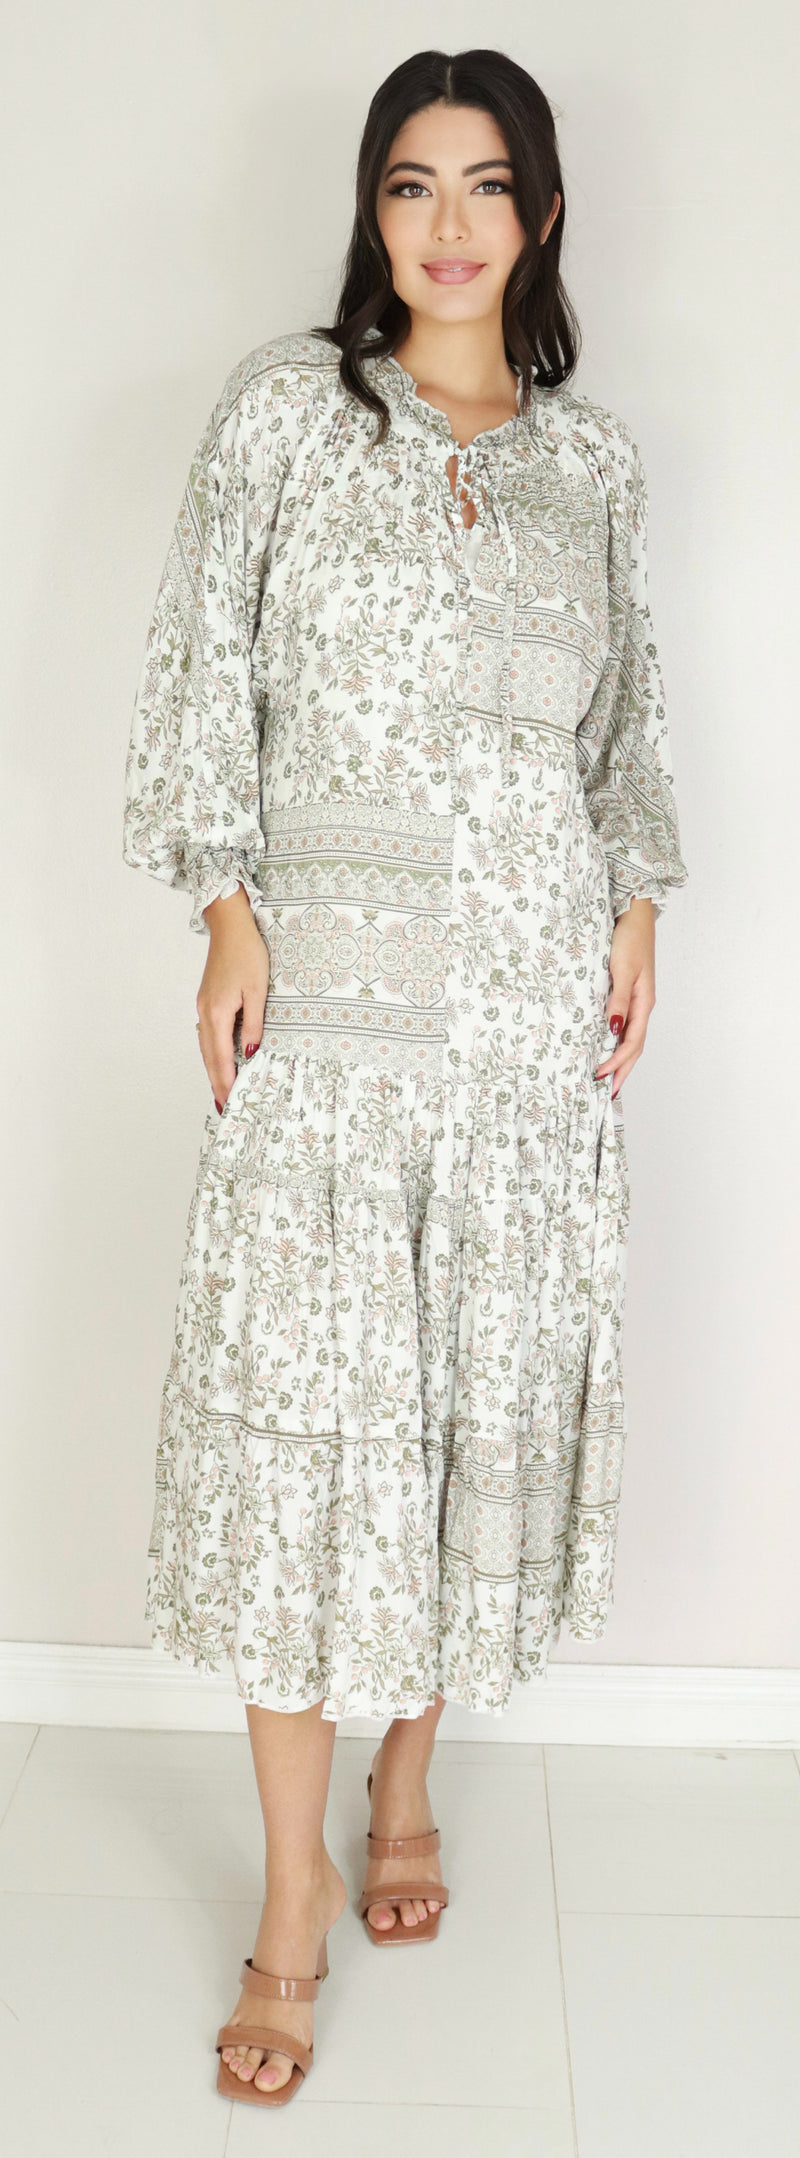 Jeans Warehouse Hawaii - PRINT LONG DRESSES - TIERED FLORAL MAXI DRESS | By LUCCA COUTURE